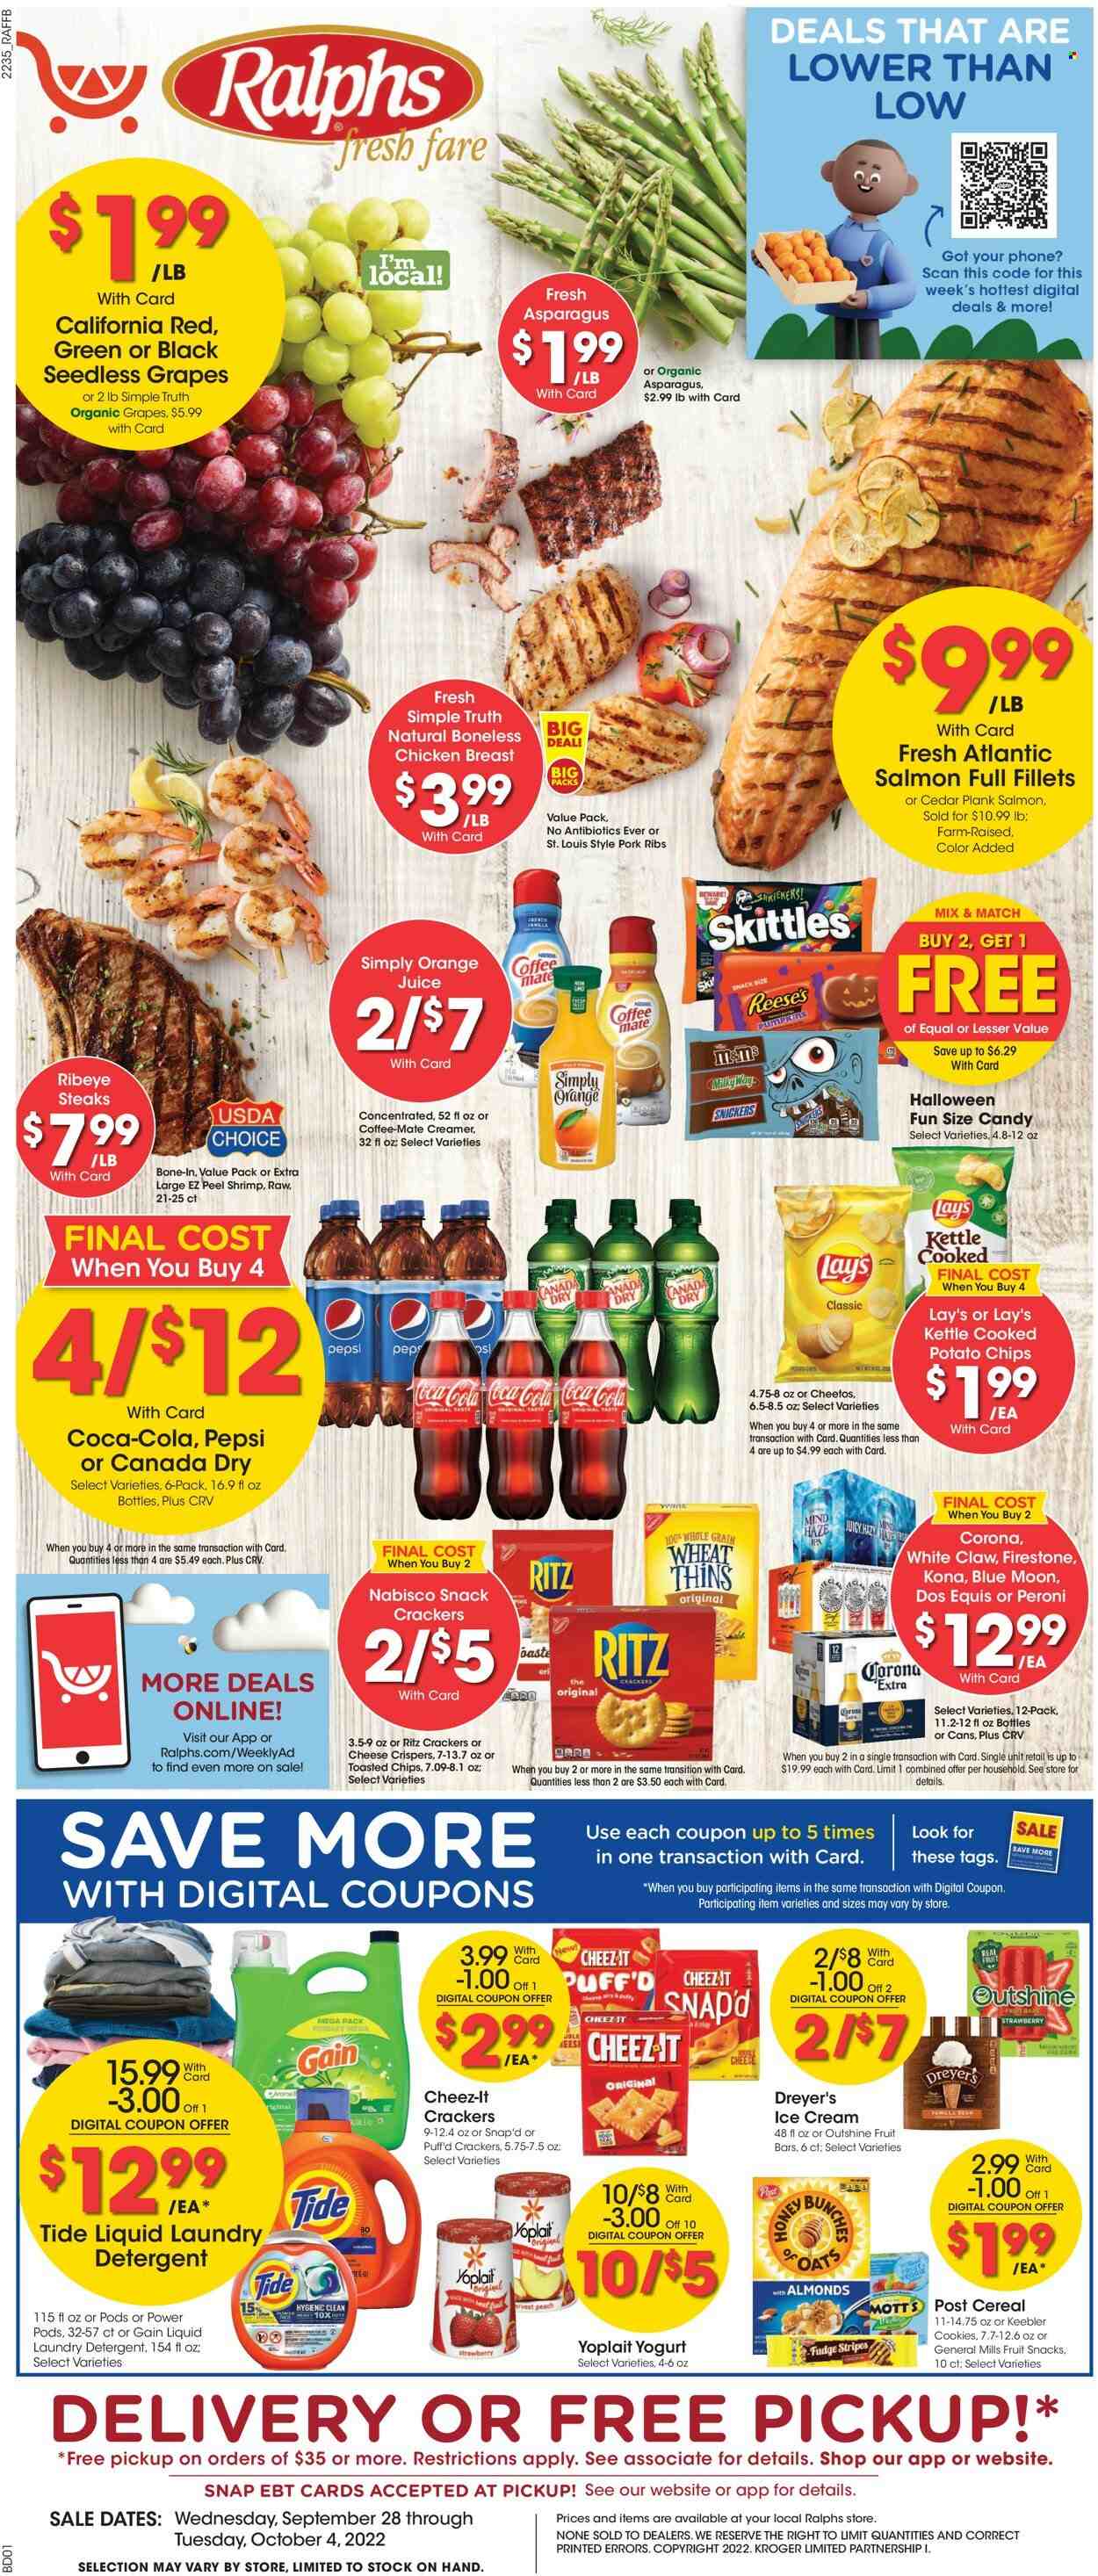 thumbnail - Ralphs Flyer - 09/28/2022 - 10/04/2022 - Sales products - asparagus, pumpkin, grapes, seedless grapes, Mott's, salmon, shrimps, yoghurt, Yoplait, Coffee-Mate, ice cream, Reese's, cookies, fudge, Milky Way, Snickers, crackers, Skittles, fruit snack, Keebler, RITZ, potato chips, Cheetos, chips, Lay’s, Thins, Cheez-It, cereals, Canada Dry, Coca-Cola, Pepsi, orange juice, juice, White Claw, beer, Corona Extra, Peroni, IPA, chicken breasts, beef meat, steak, ribeye steak, pork meat, pork ribs, detergent, Gain, Tide, laundry detergent, Halloween, bunches, Dos Equis, Blue Moon. Page 1.